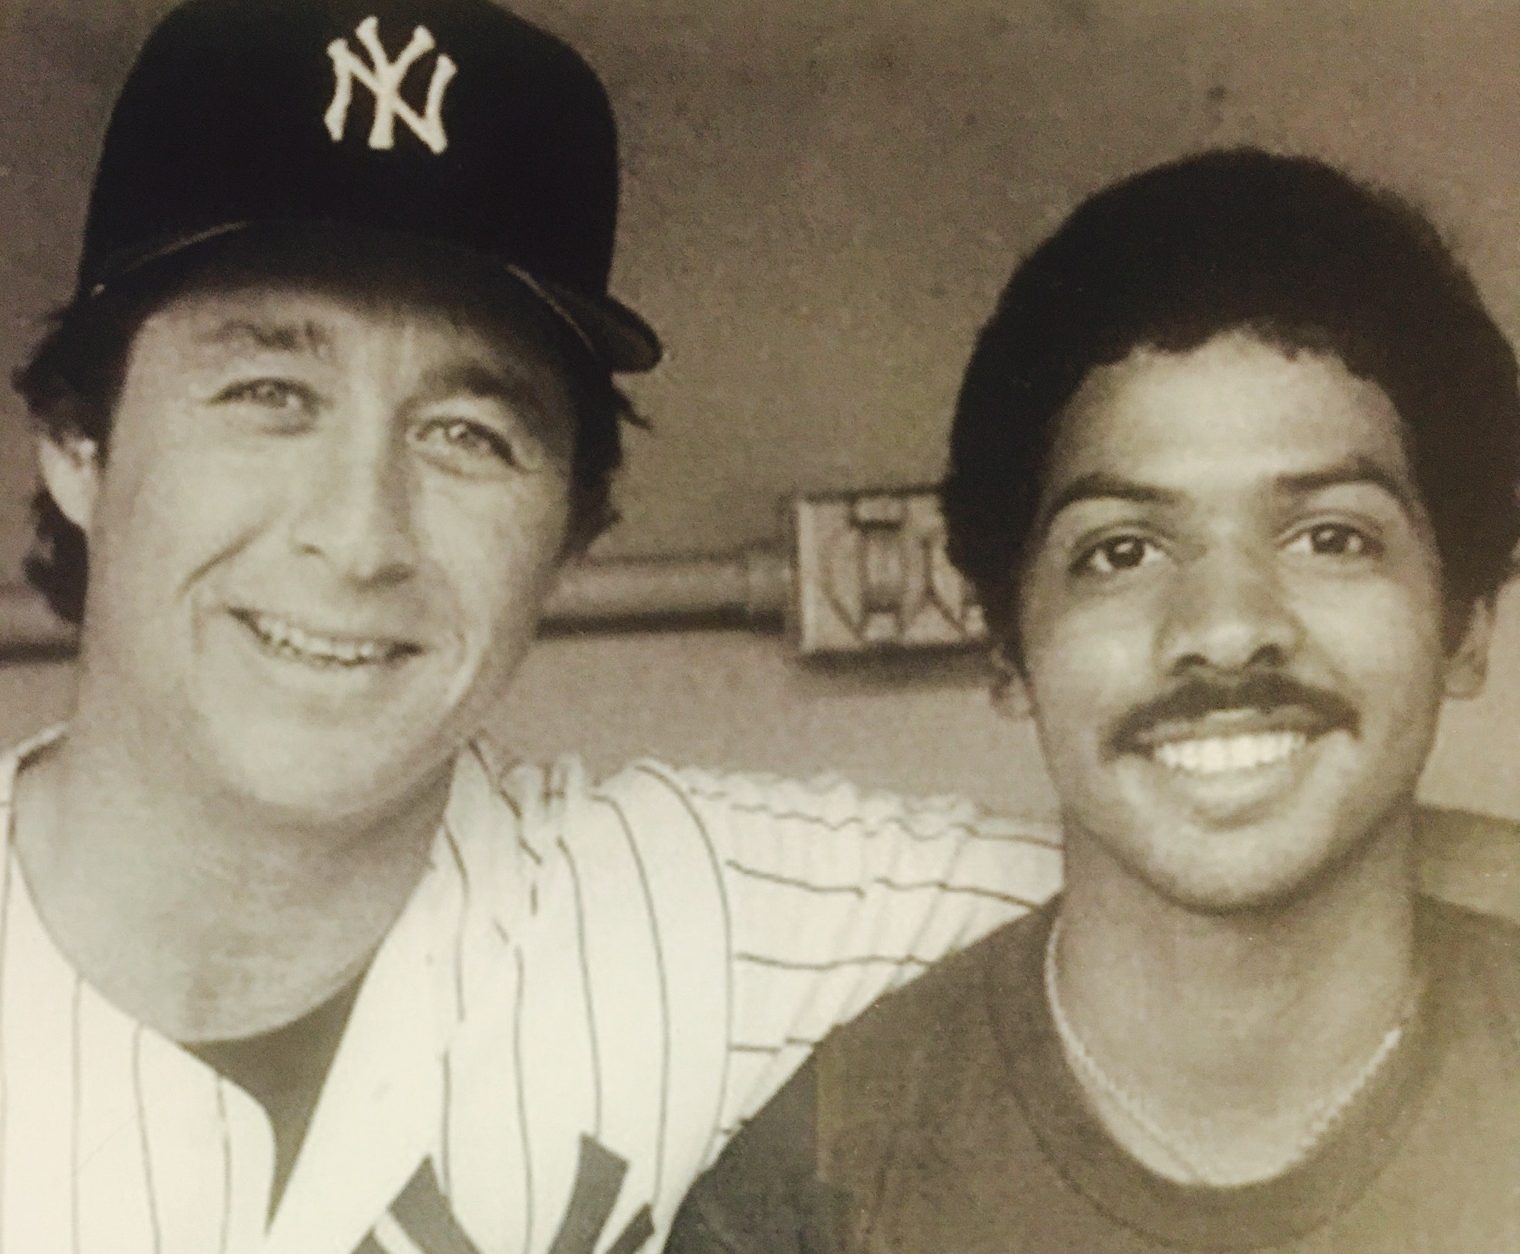 Negron: Bobby Murcer Always Missed – Ray Negron's Play Ball Weekly Blog